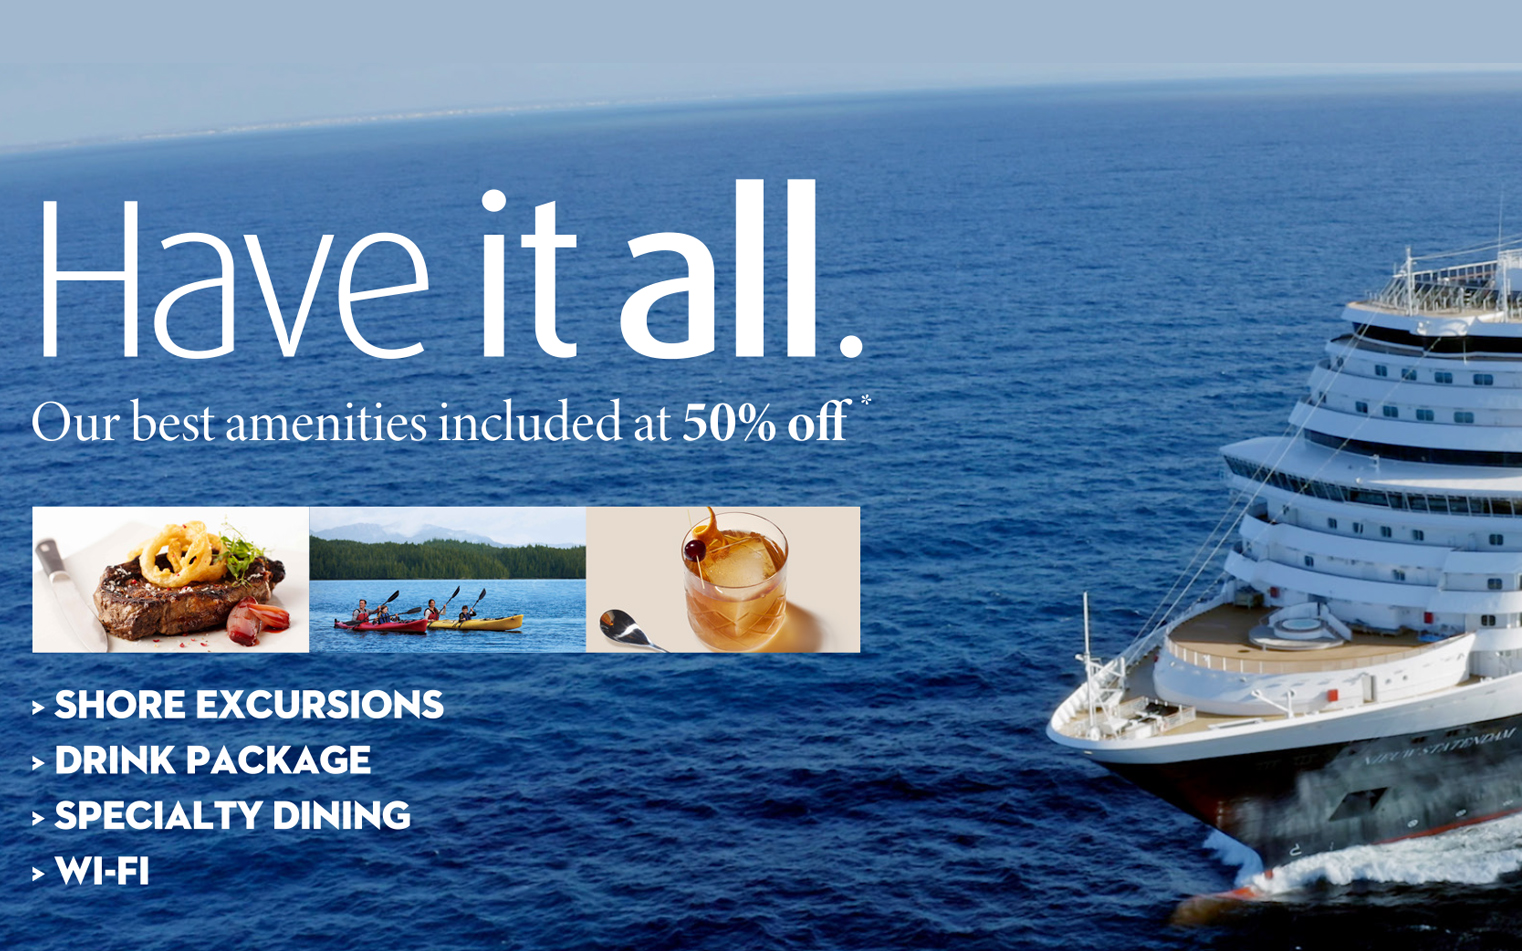 Have it All with Holland America - The Best Amenities included at 50% Off*